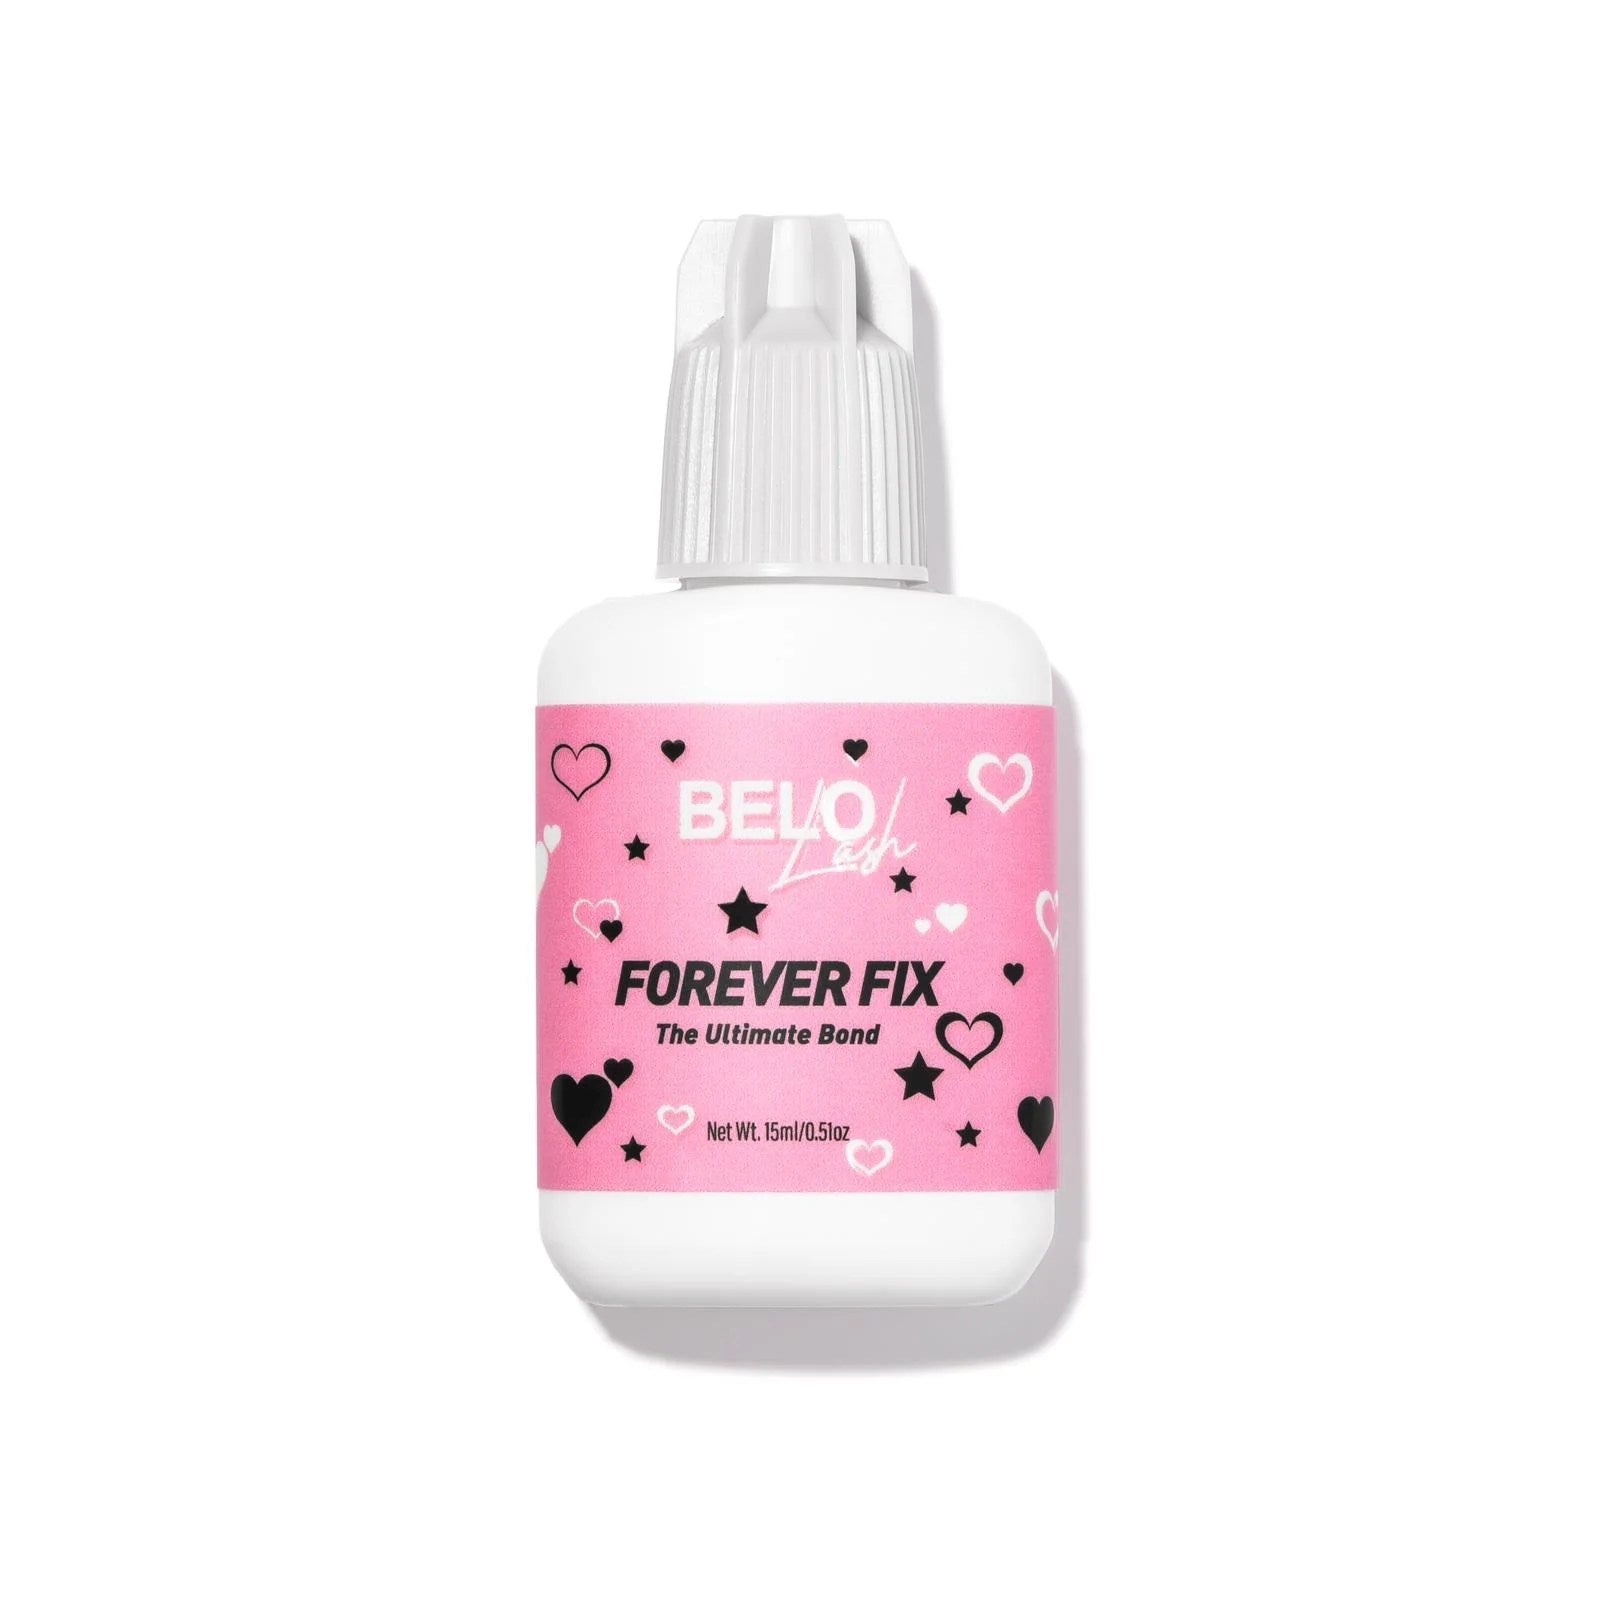 Forever fix